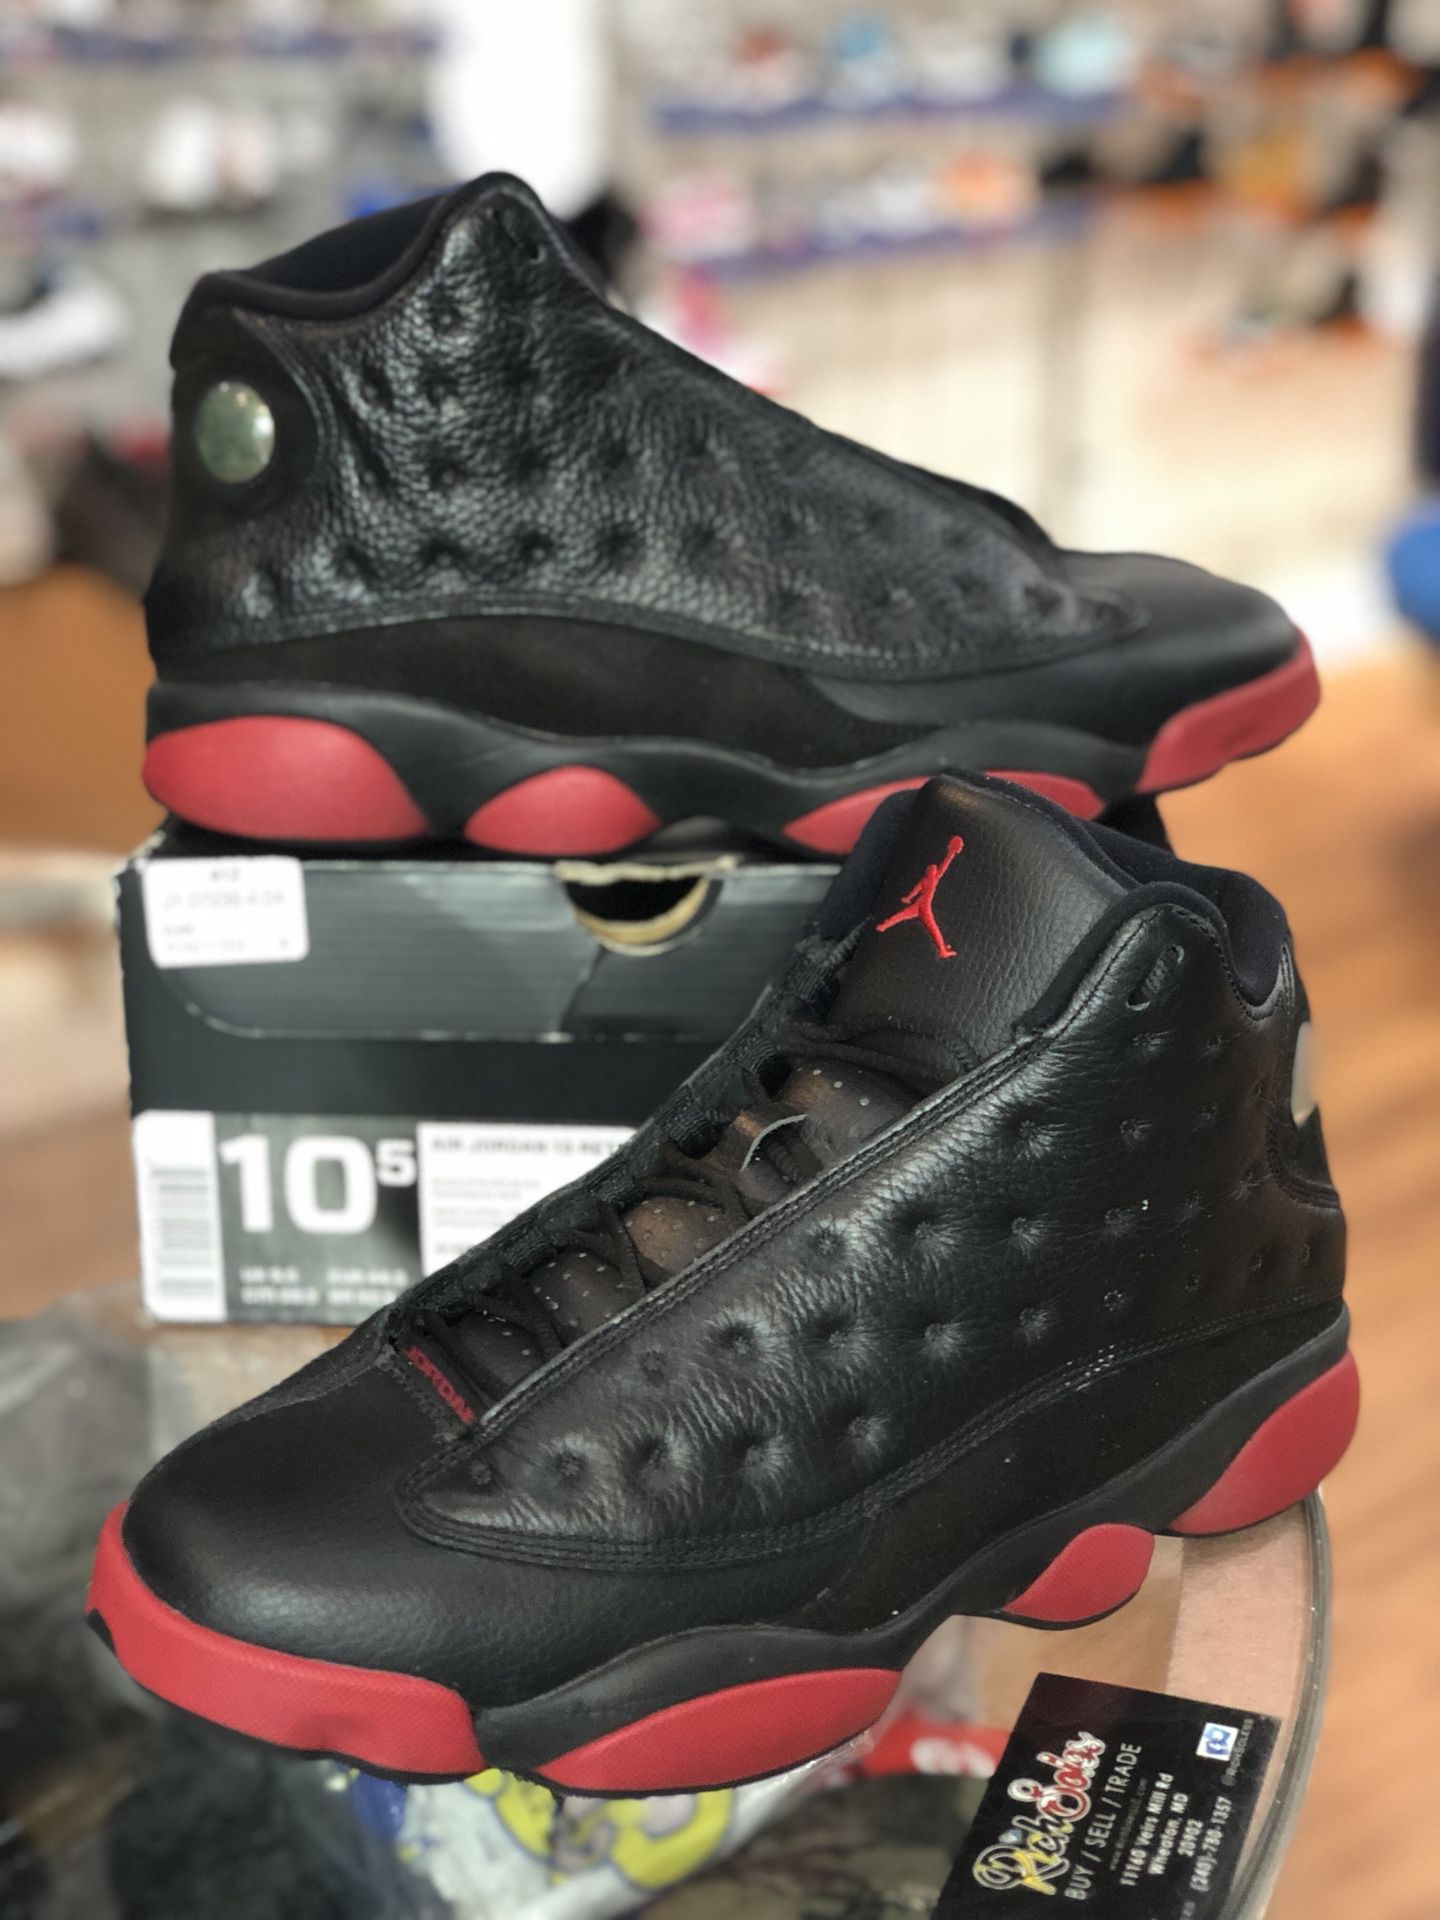 Dirty Bred 13s size 10.5